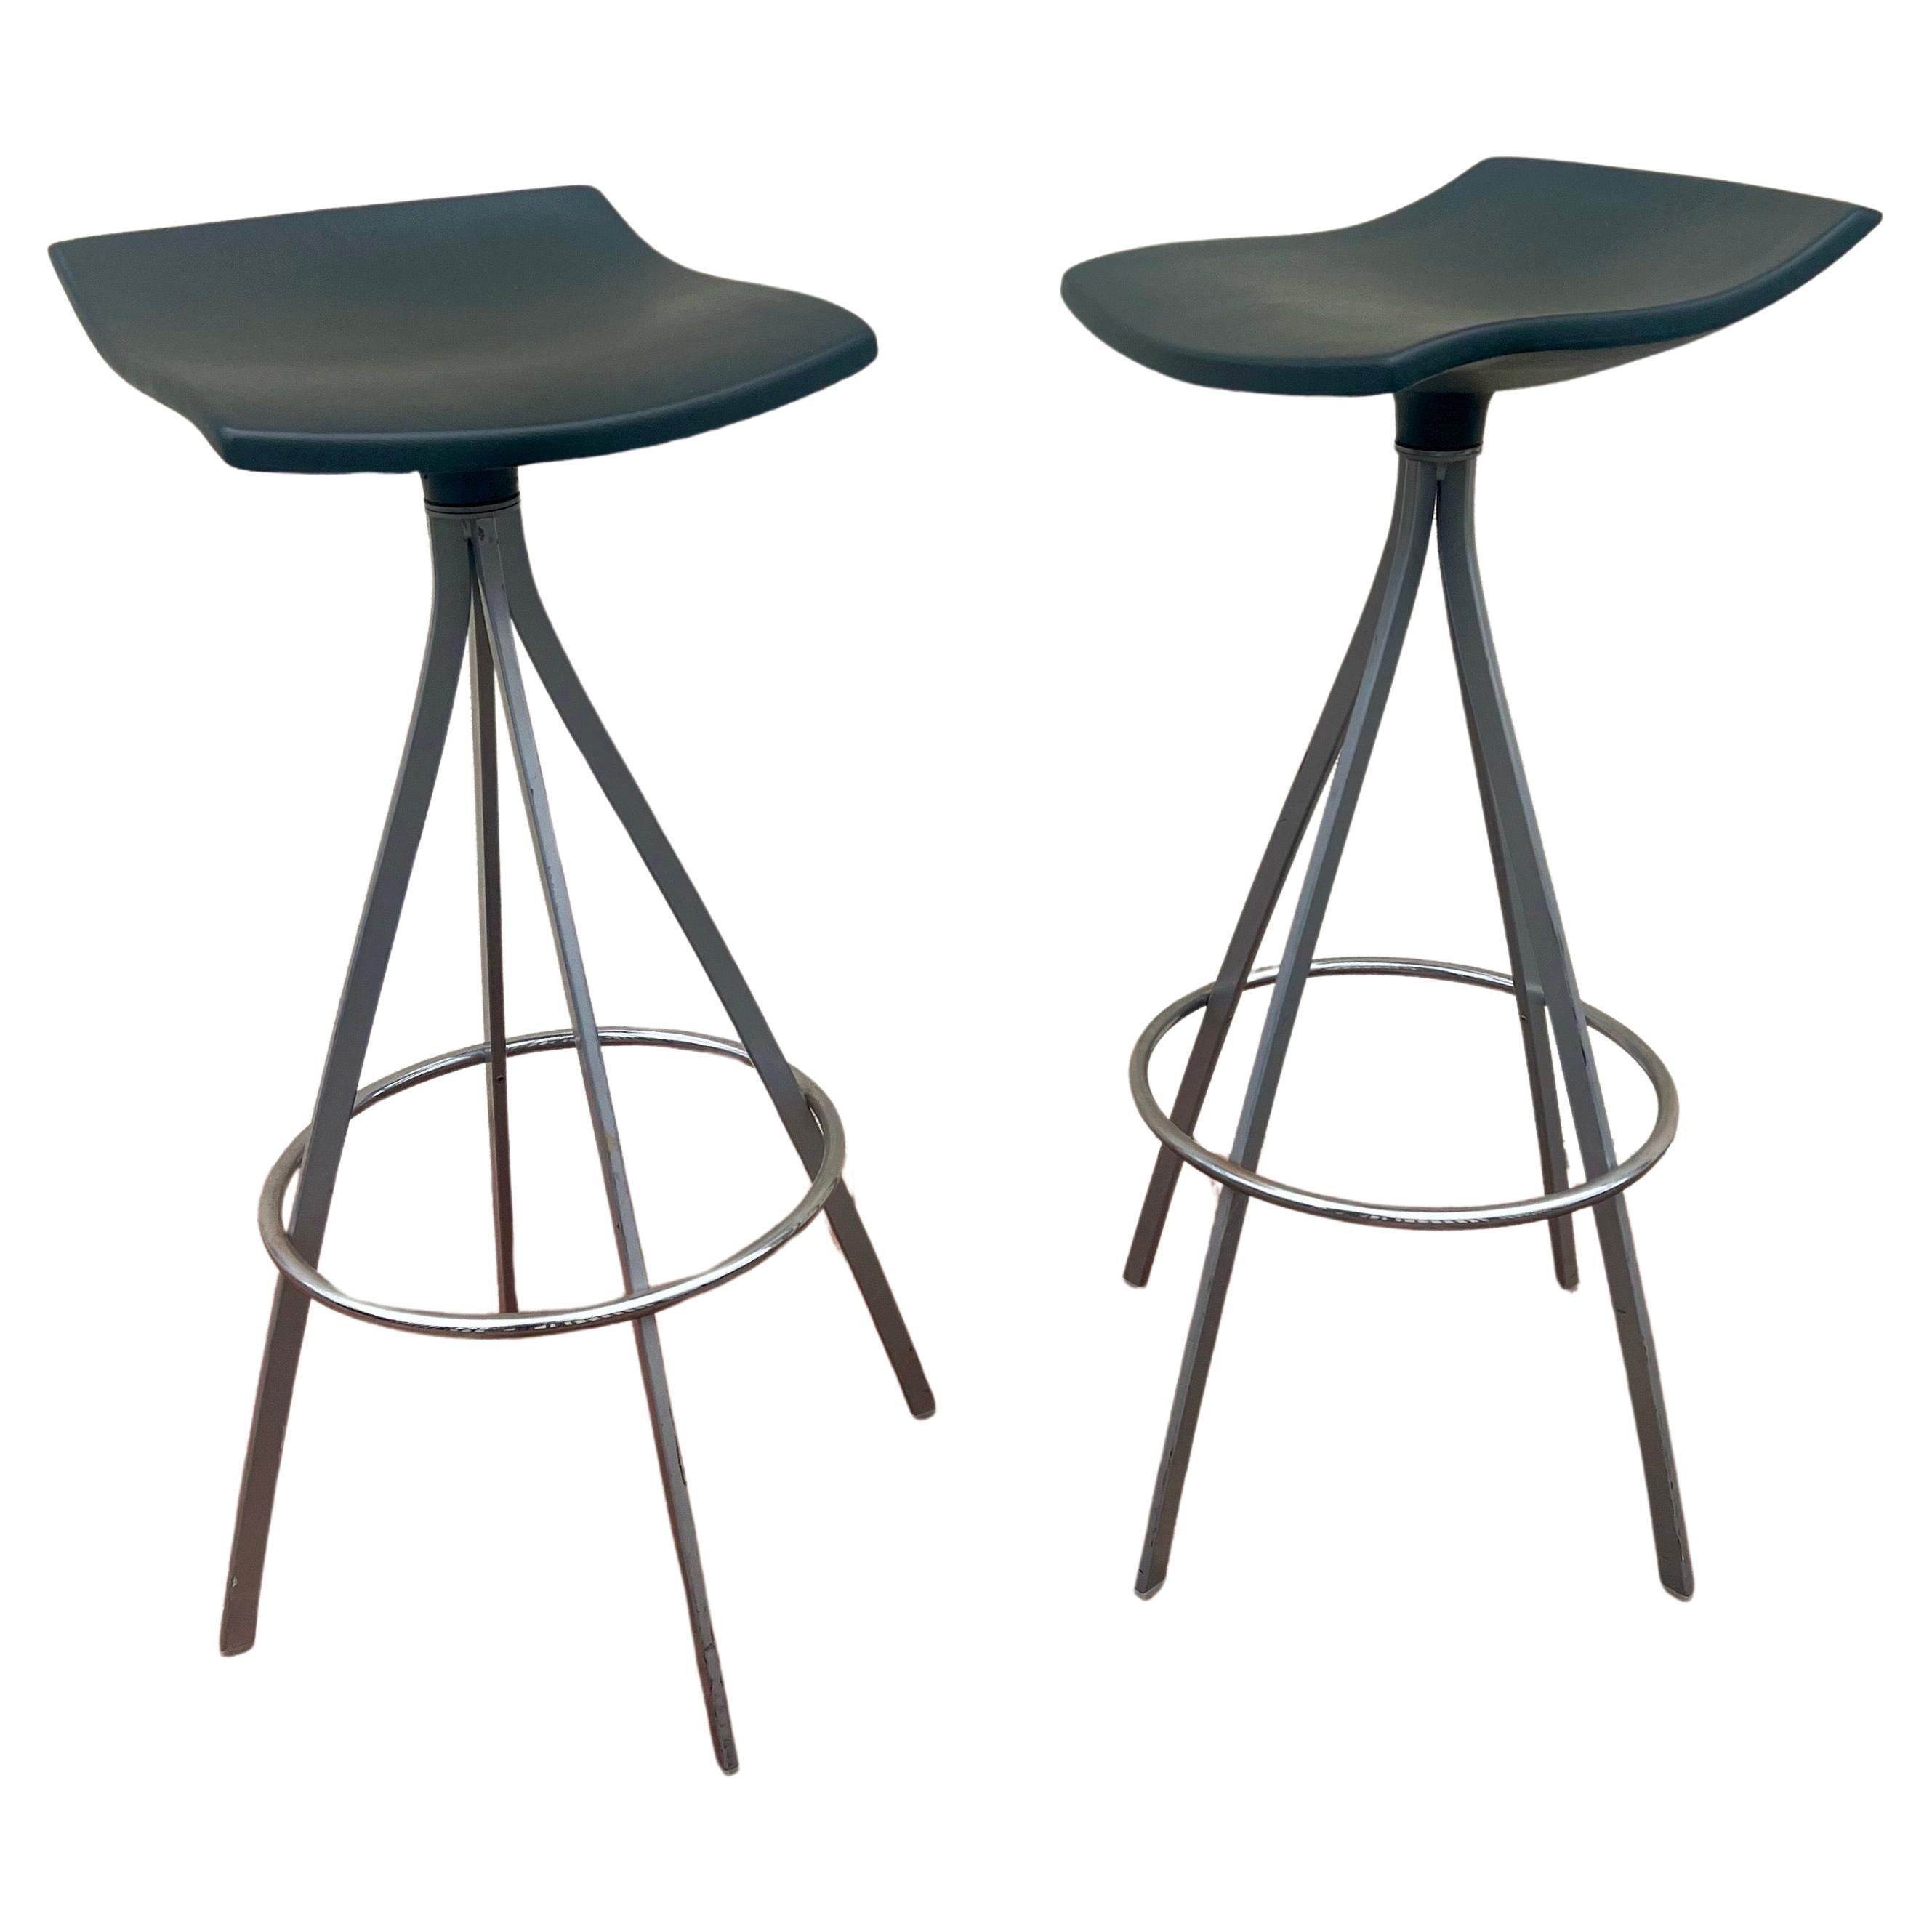 Pair of Postmodern stools Designed by Jorge Pensi for Mobles 114 Barcelona